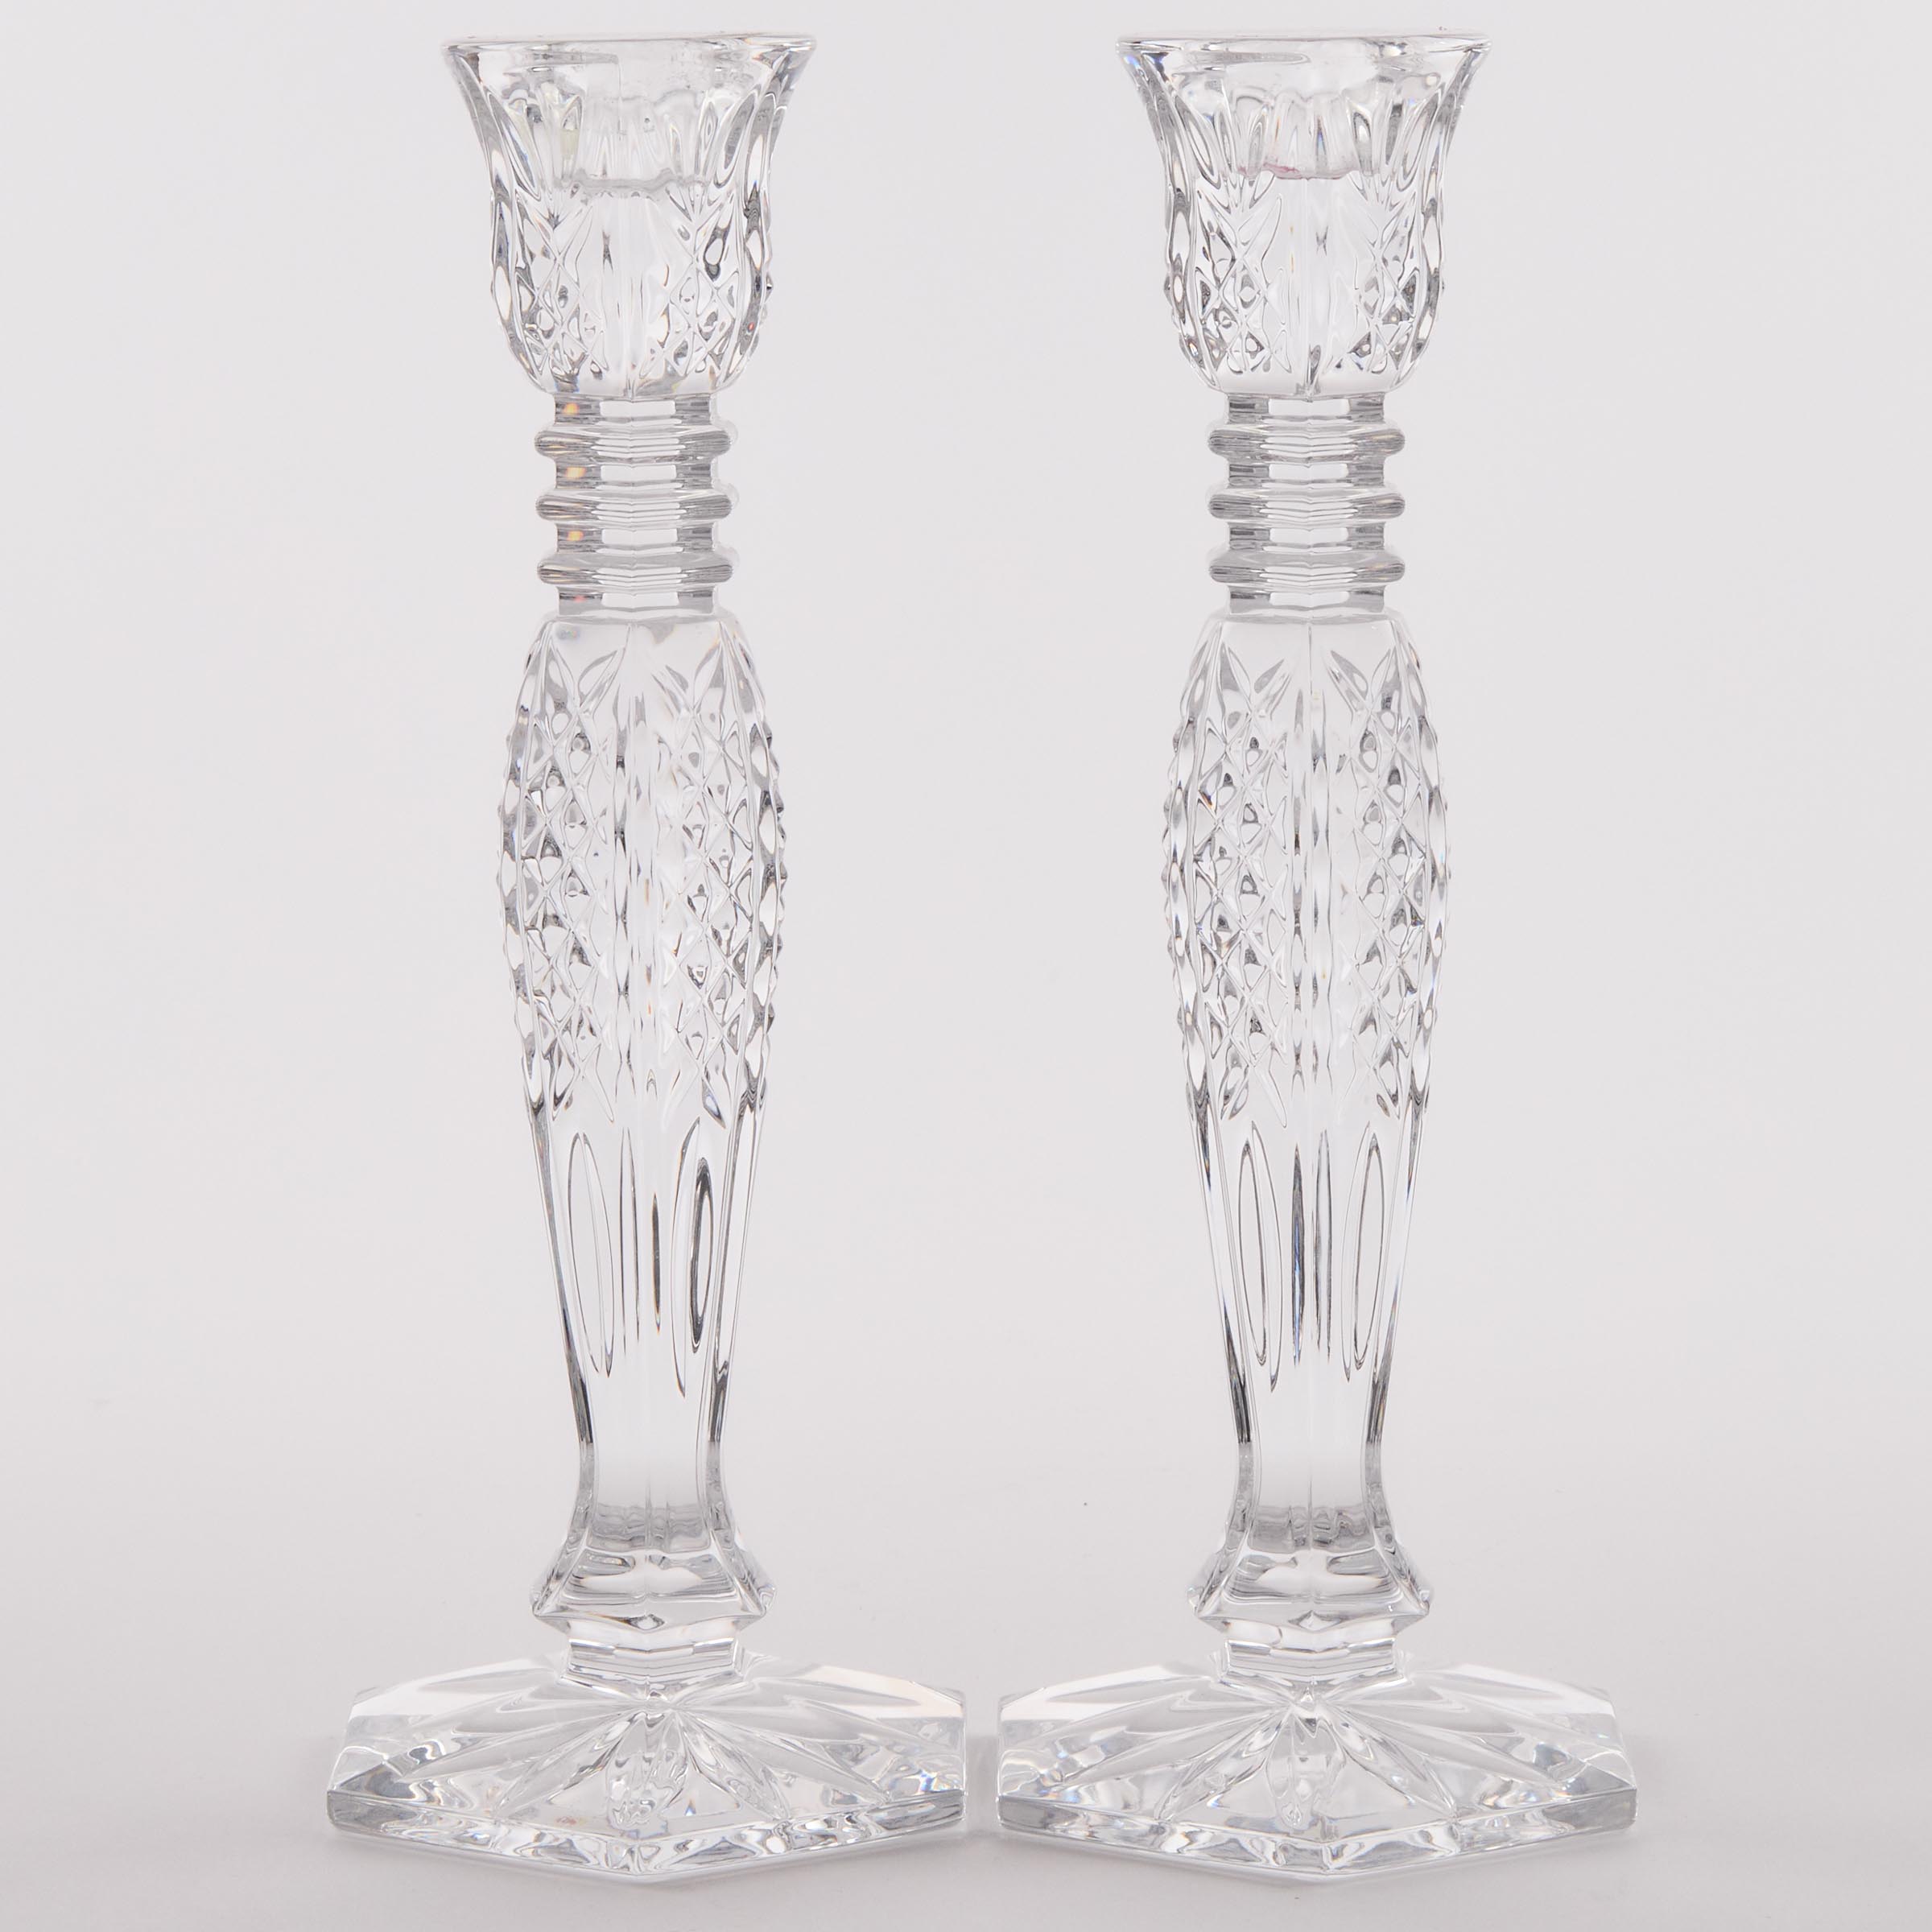 Pair of Waterford Cut Glass Candlesticks  2fb050f